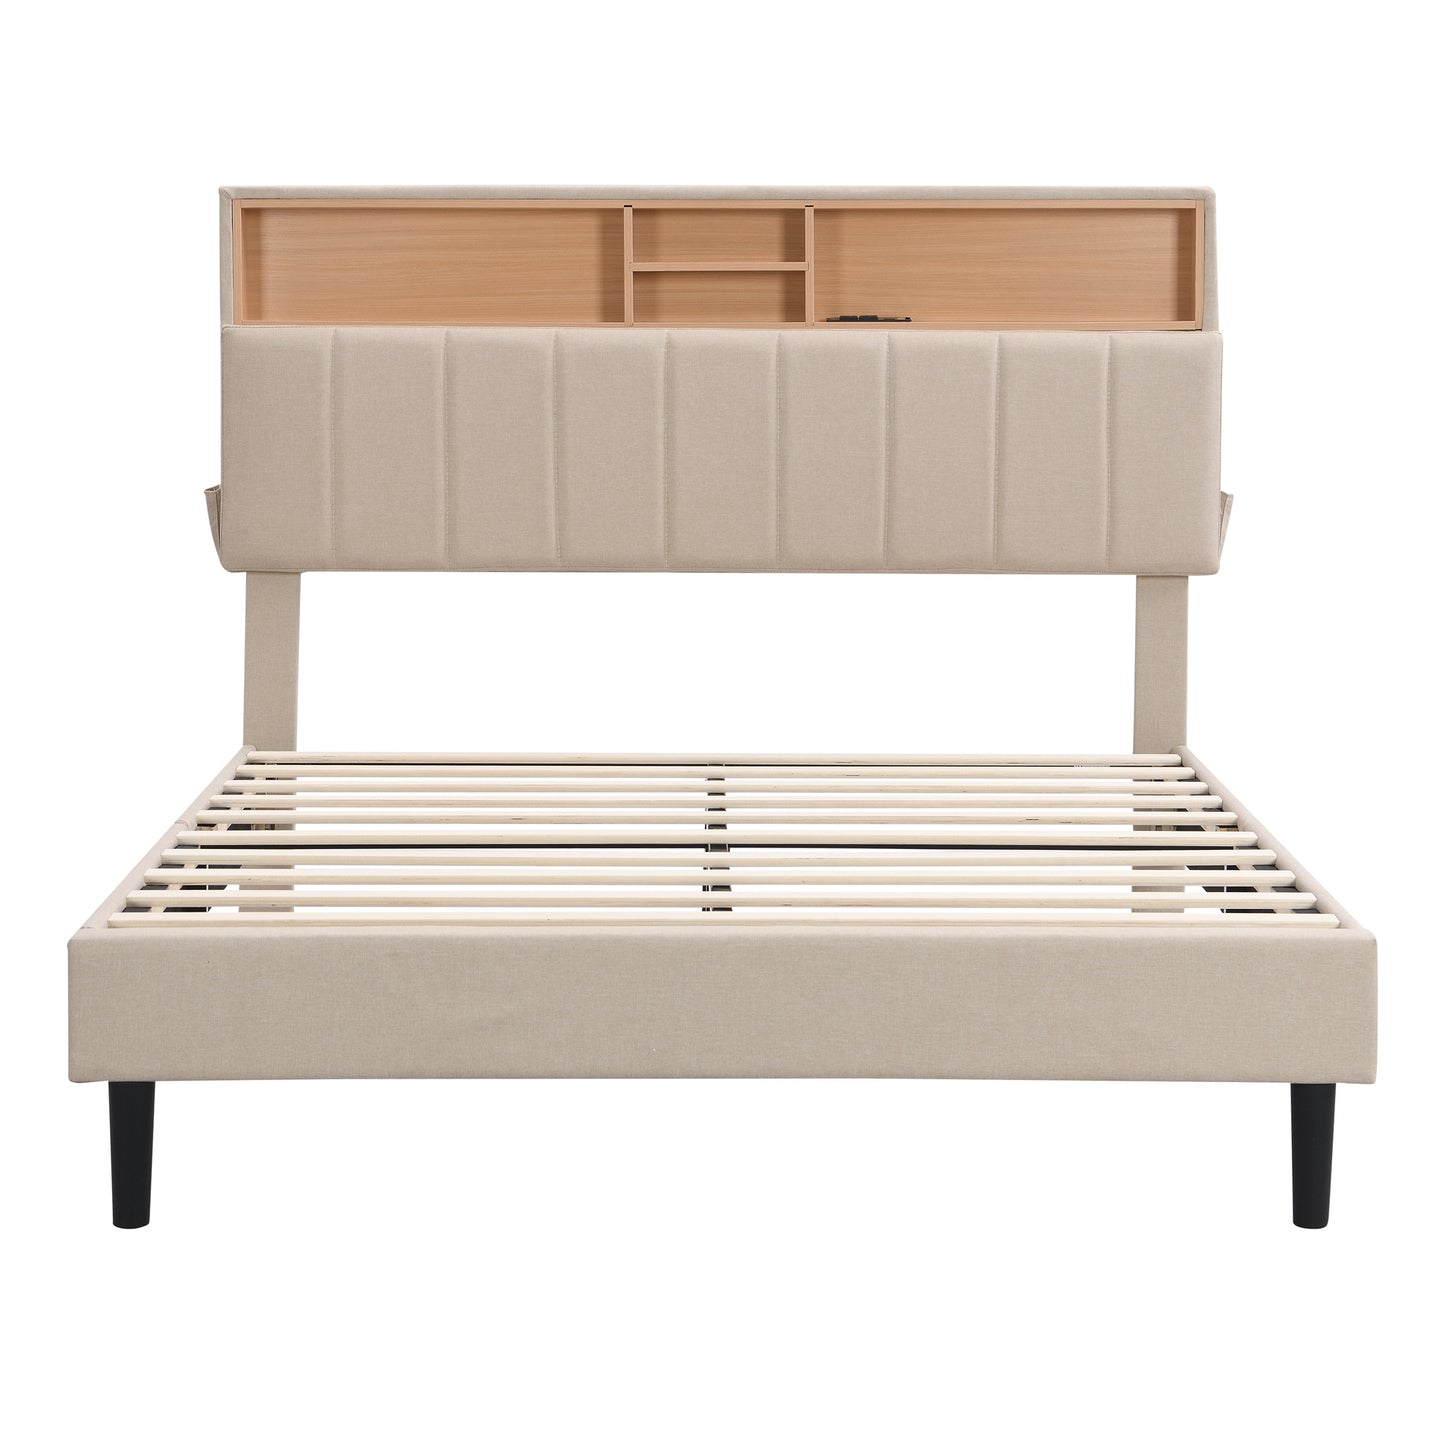 Full size Upholstered Platform Bed with Storage Headboard and USB Port,  Linen Fabric Upholstered Bed (Beige)